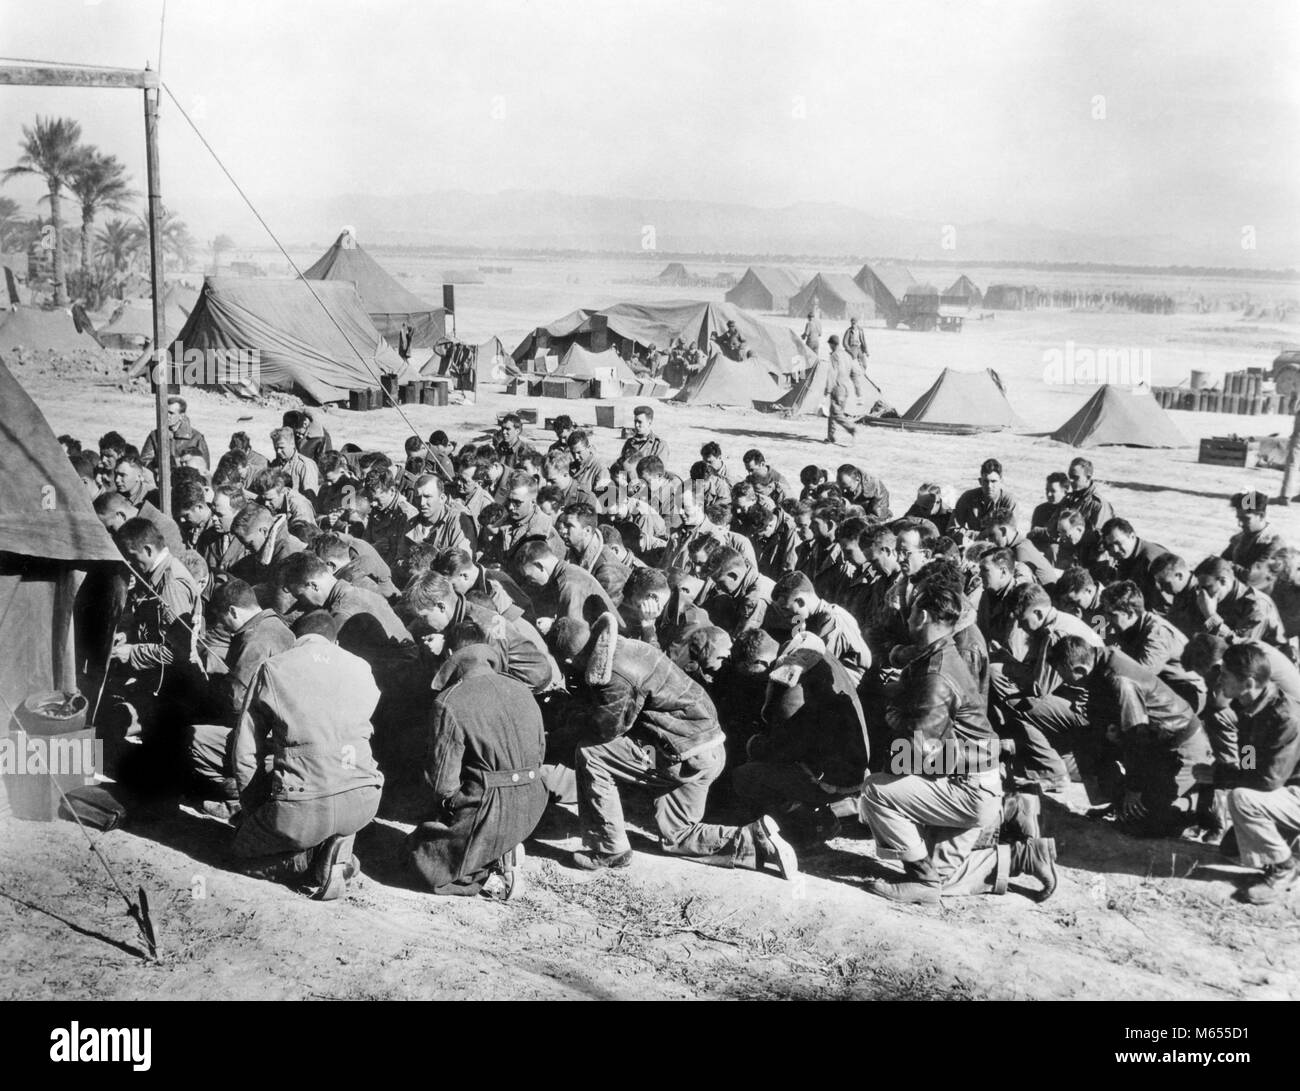 1940s U.S. ARMY SOLDIERS ATTEND CHURCH SERVICES ON A TROPICAL BEACH - a3739 HAR001 HARS HIGH ANGLE ADVENTURE RELIGIOUS COURAGE EXCITEMENT WORLD WAR TWO SUPPORT TENTS ARMED FORCE ATTEND FAITH MALES B&W BLACK AND WHITE CAUCASIAN ETHNICITY KNEEL OLD FASHIONED PERSONS Stock Photo